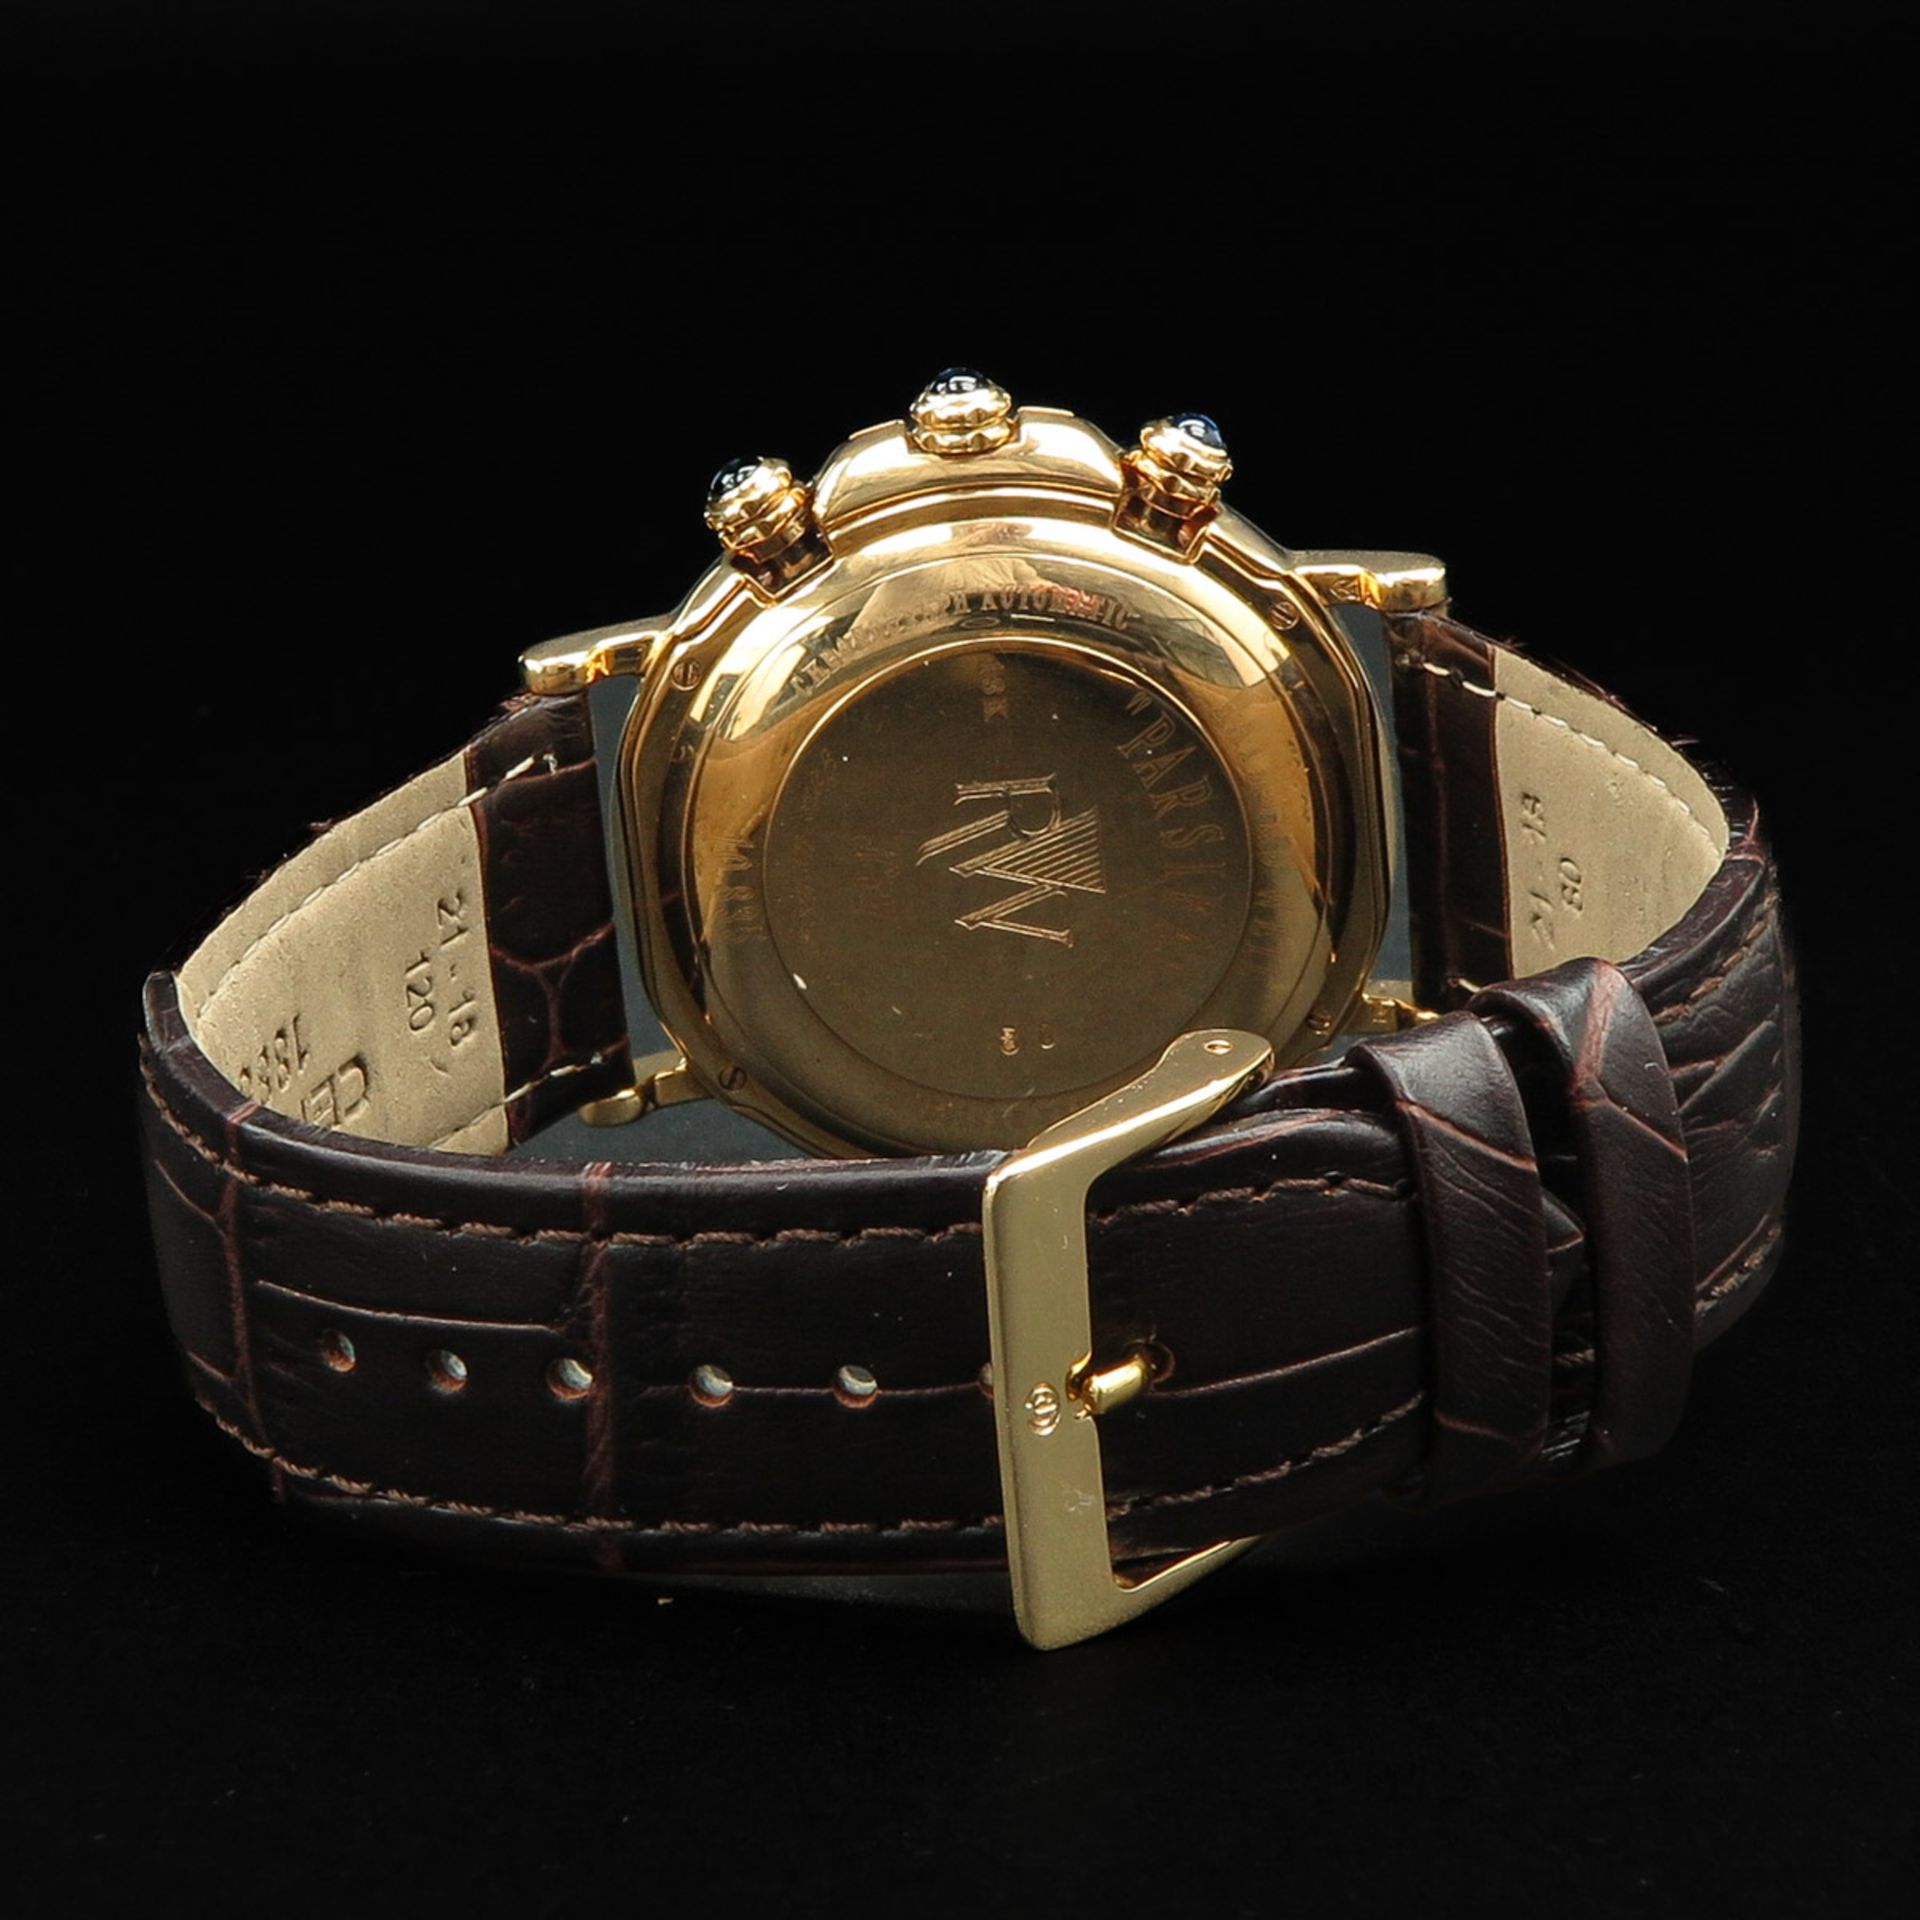 A Mens Raymond Weil Watch - Image 2 of 6